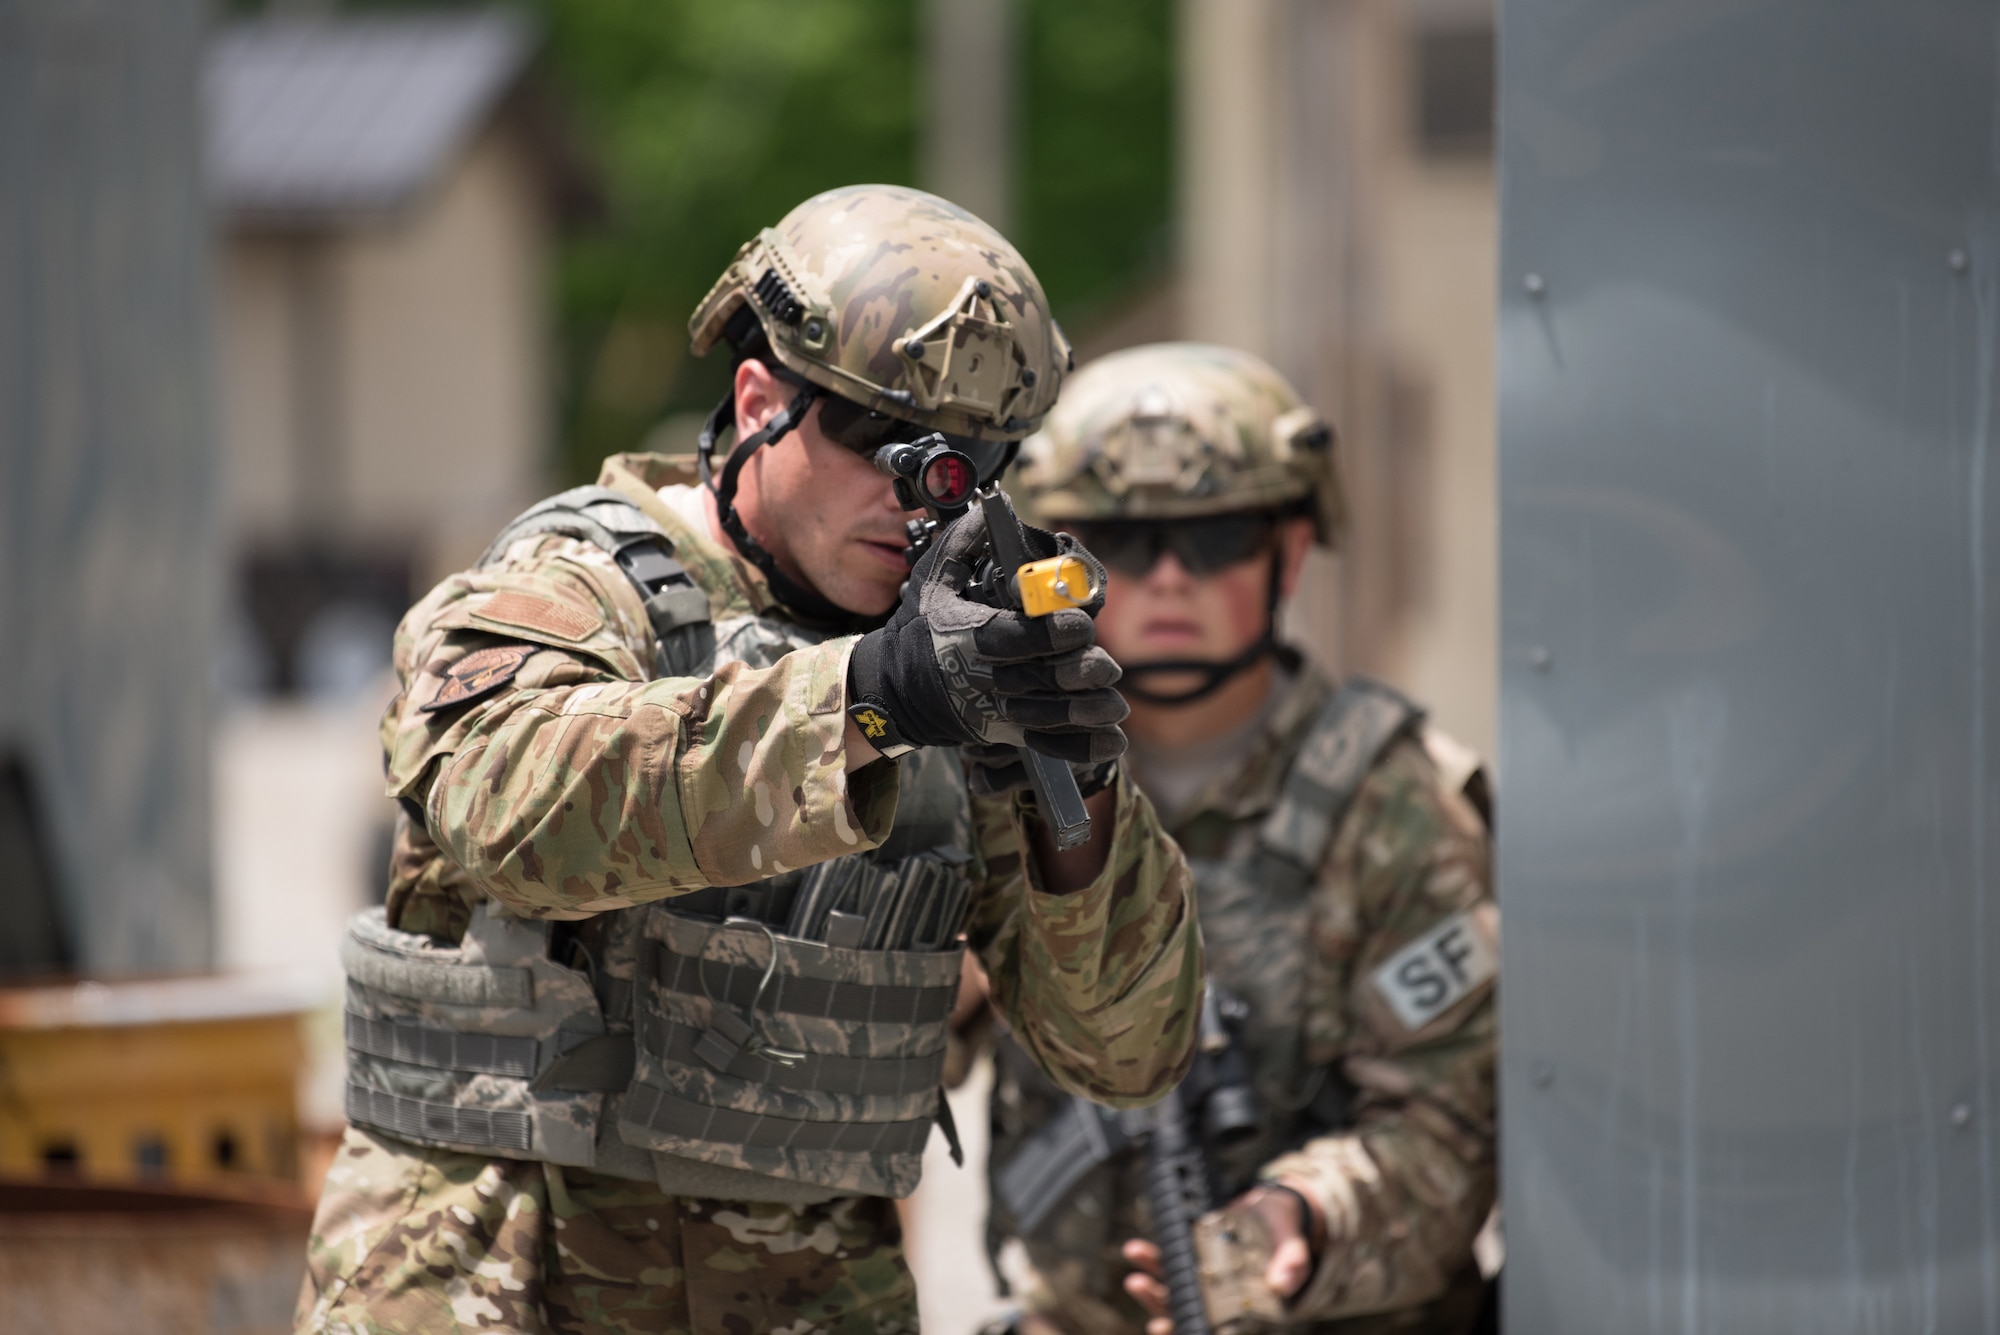 Staff Sgt. Joseph Howell,  a fire team member from the Kentucky Air National Guard’s 123rd Security Forces Squadron, leads a simulated short-notice mission to degrade terrorist capabilities during a field training exercise at Fort Knox, Ky., May 21, 2019. The exercise was designed to test security tactics in a simulated Afghan village from May 18-22. (U.S. Air National Guard photo by Phil Speck)